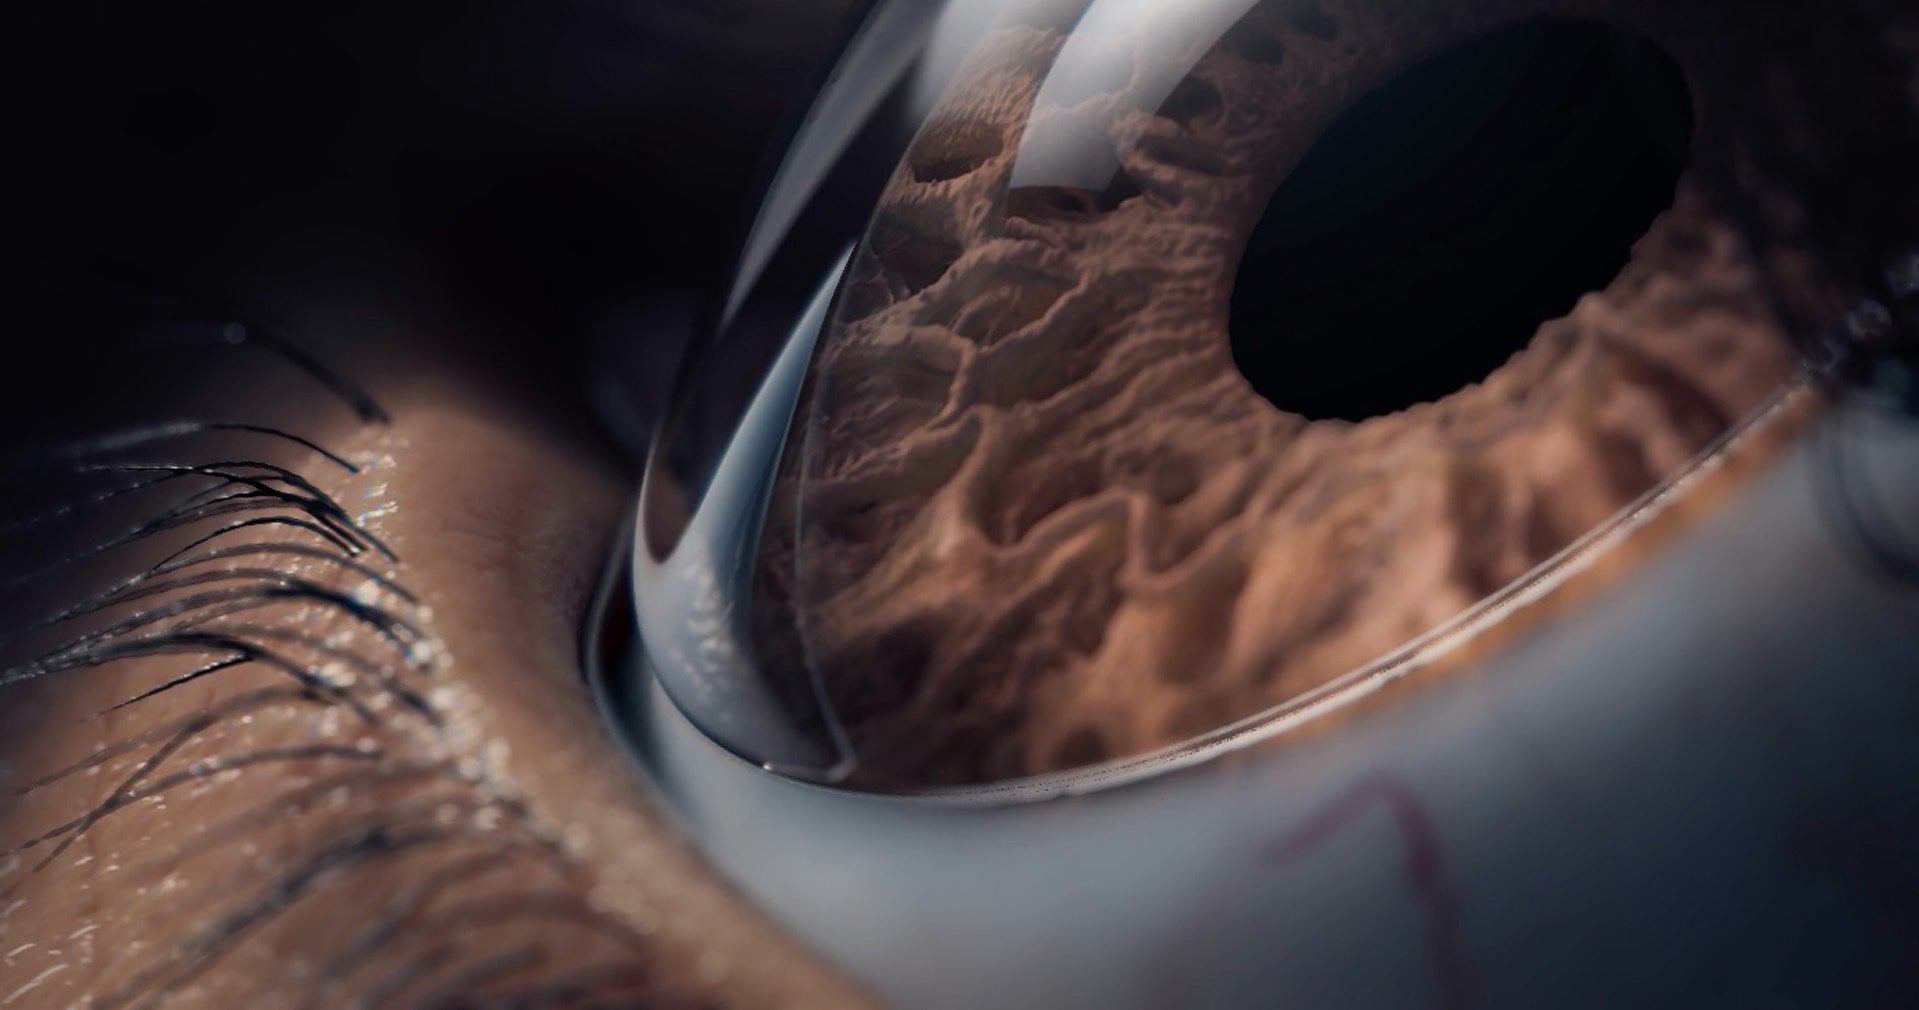 Extreme close-up view of a 3D-animated eye wearing Lynthera's contact lens for ocular drug delivery